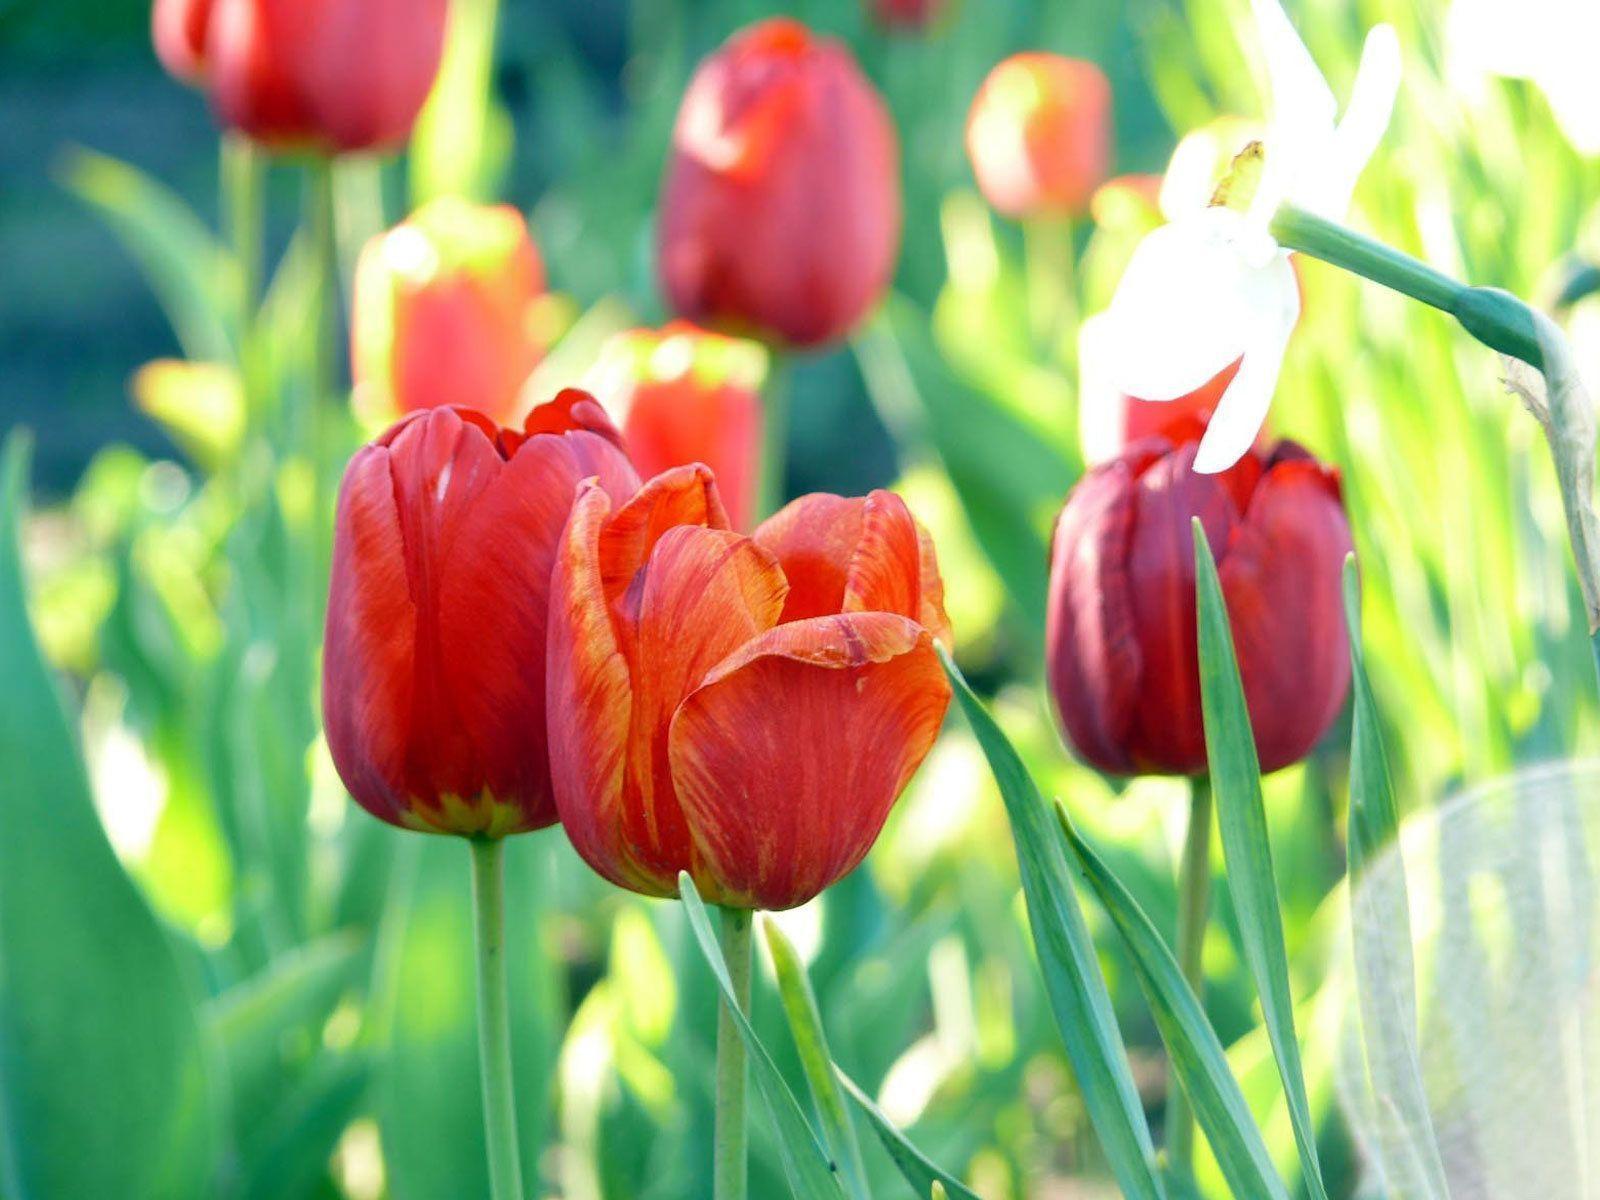 Is Summer Red Tulips Wallpaper In Resolution 1280x1024 Choose Your